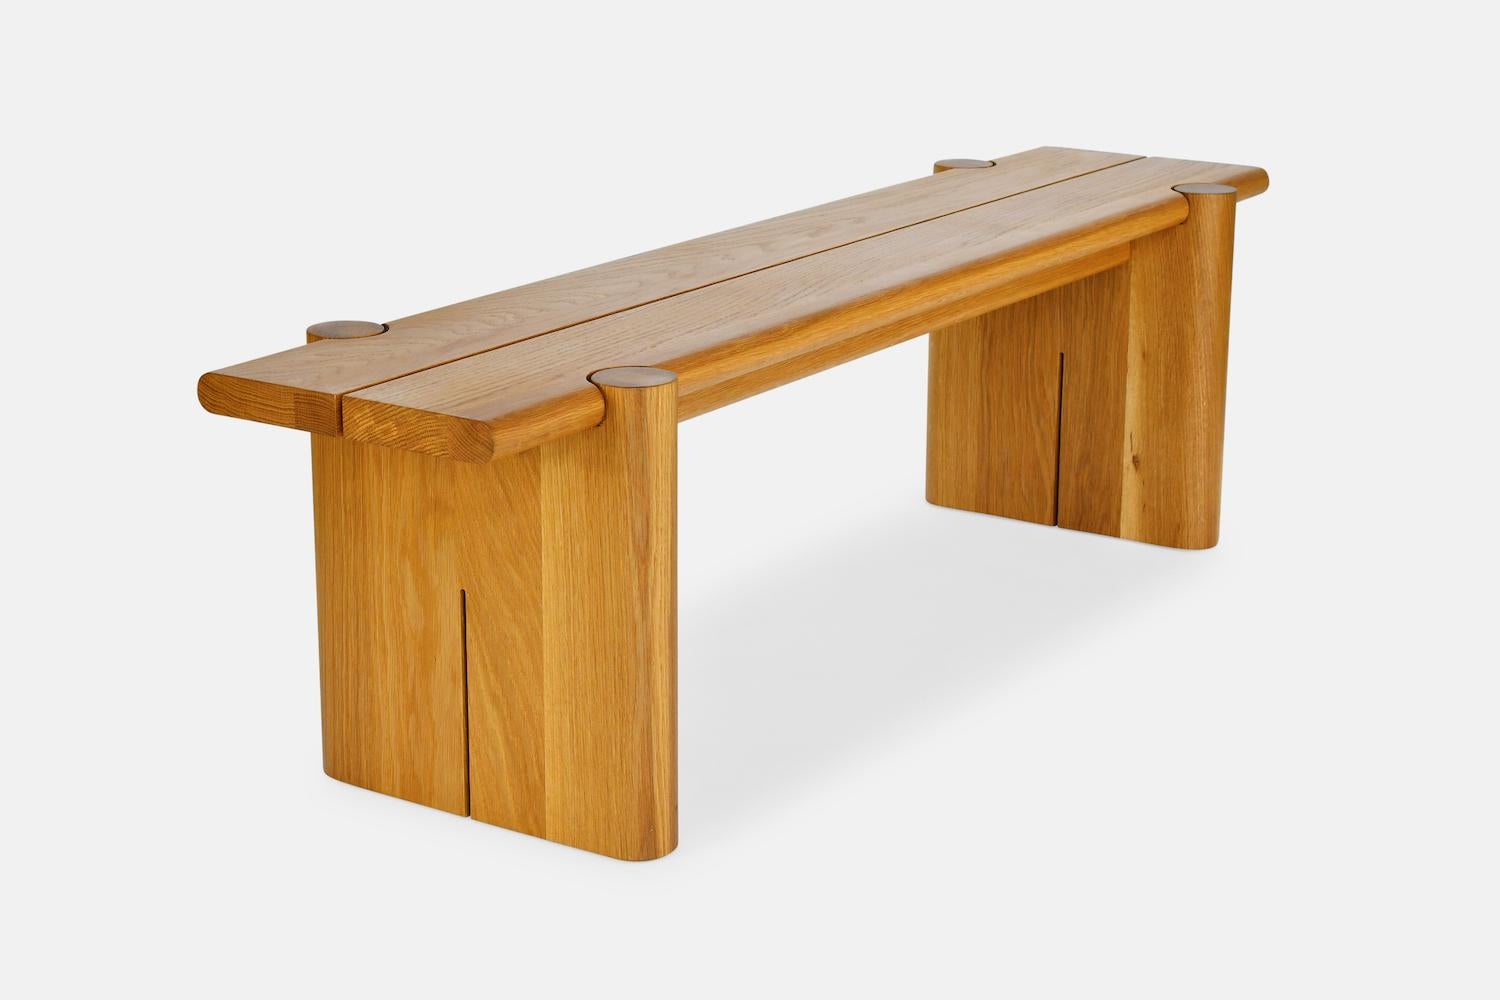 The Sulaco bench is a study in shape, function and form. With all radiused edges and spatial reveal details this bench immediately refines the solid wood form. The ideal piece that provides a thoughtful blend of sculpture and pop to any space. 

84